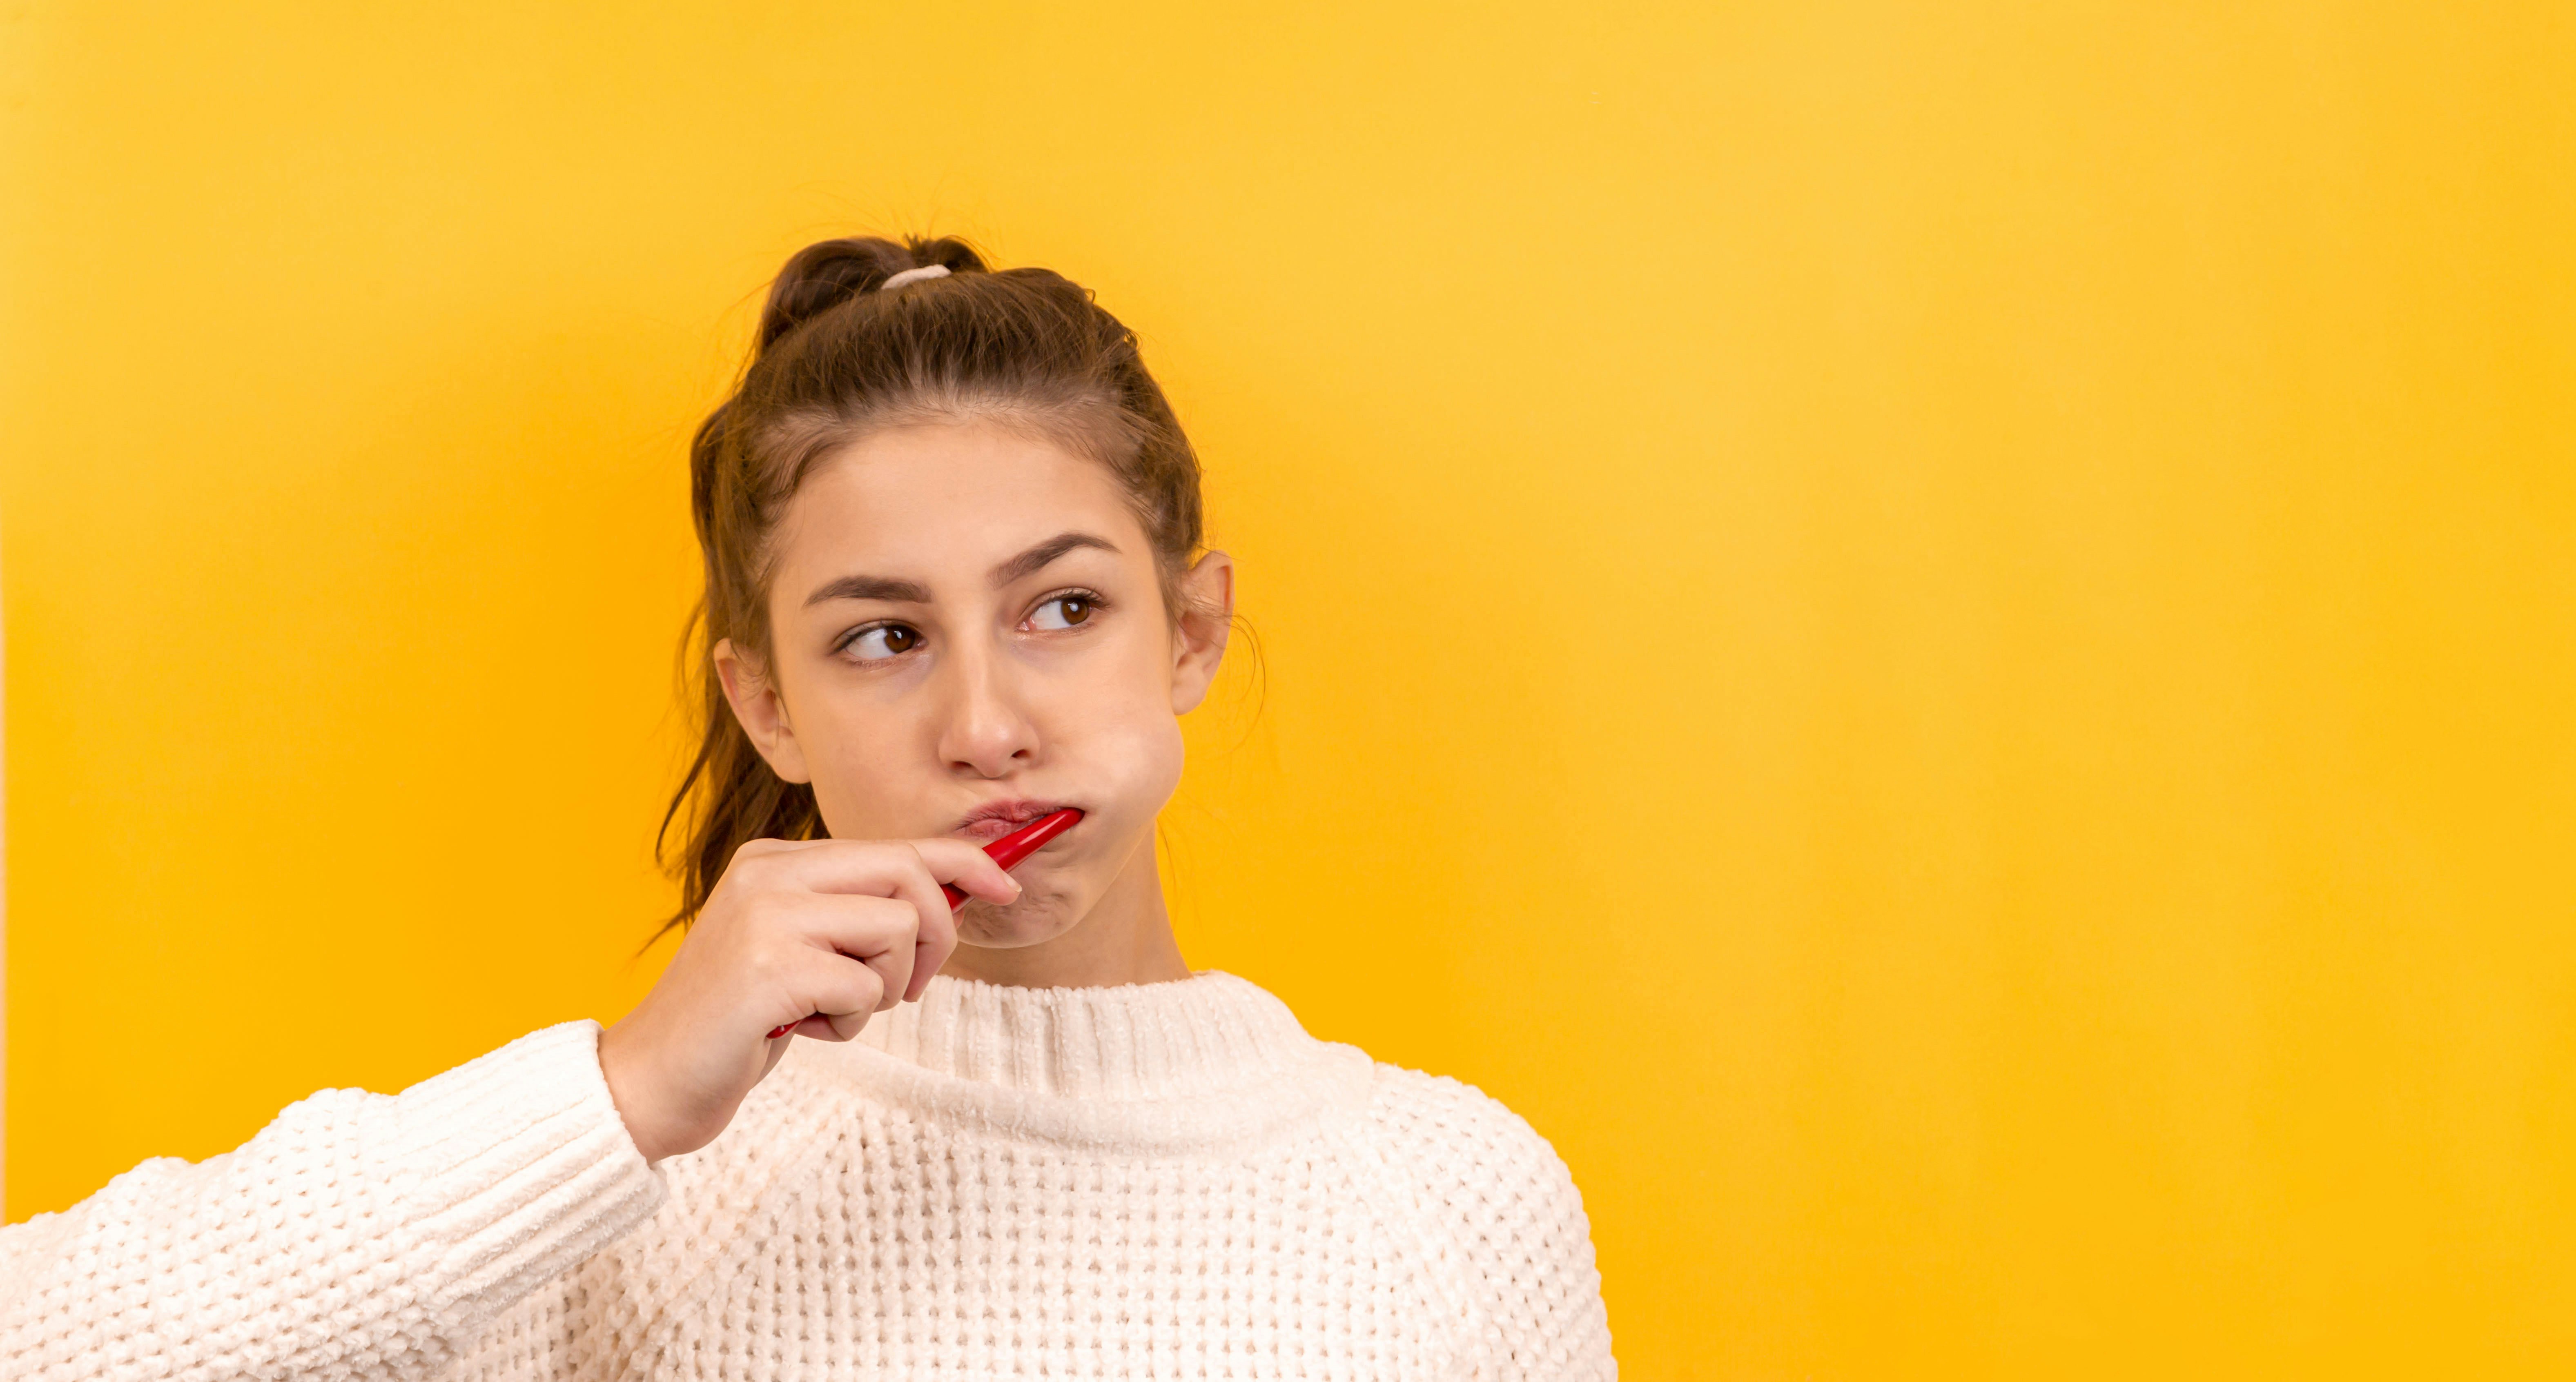 Portrait of a beautiful girl on a yellow background, who is brushing her teeth and is thinking about something. Place for an inscription. Portrait. Dentistry